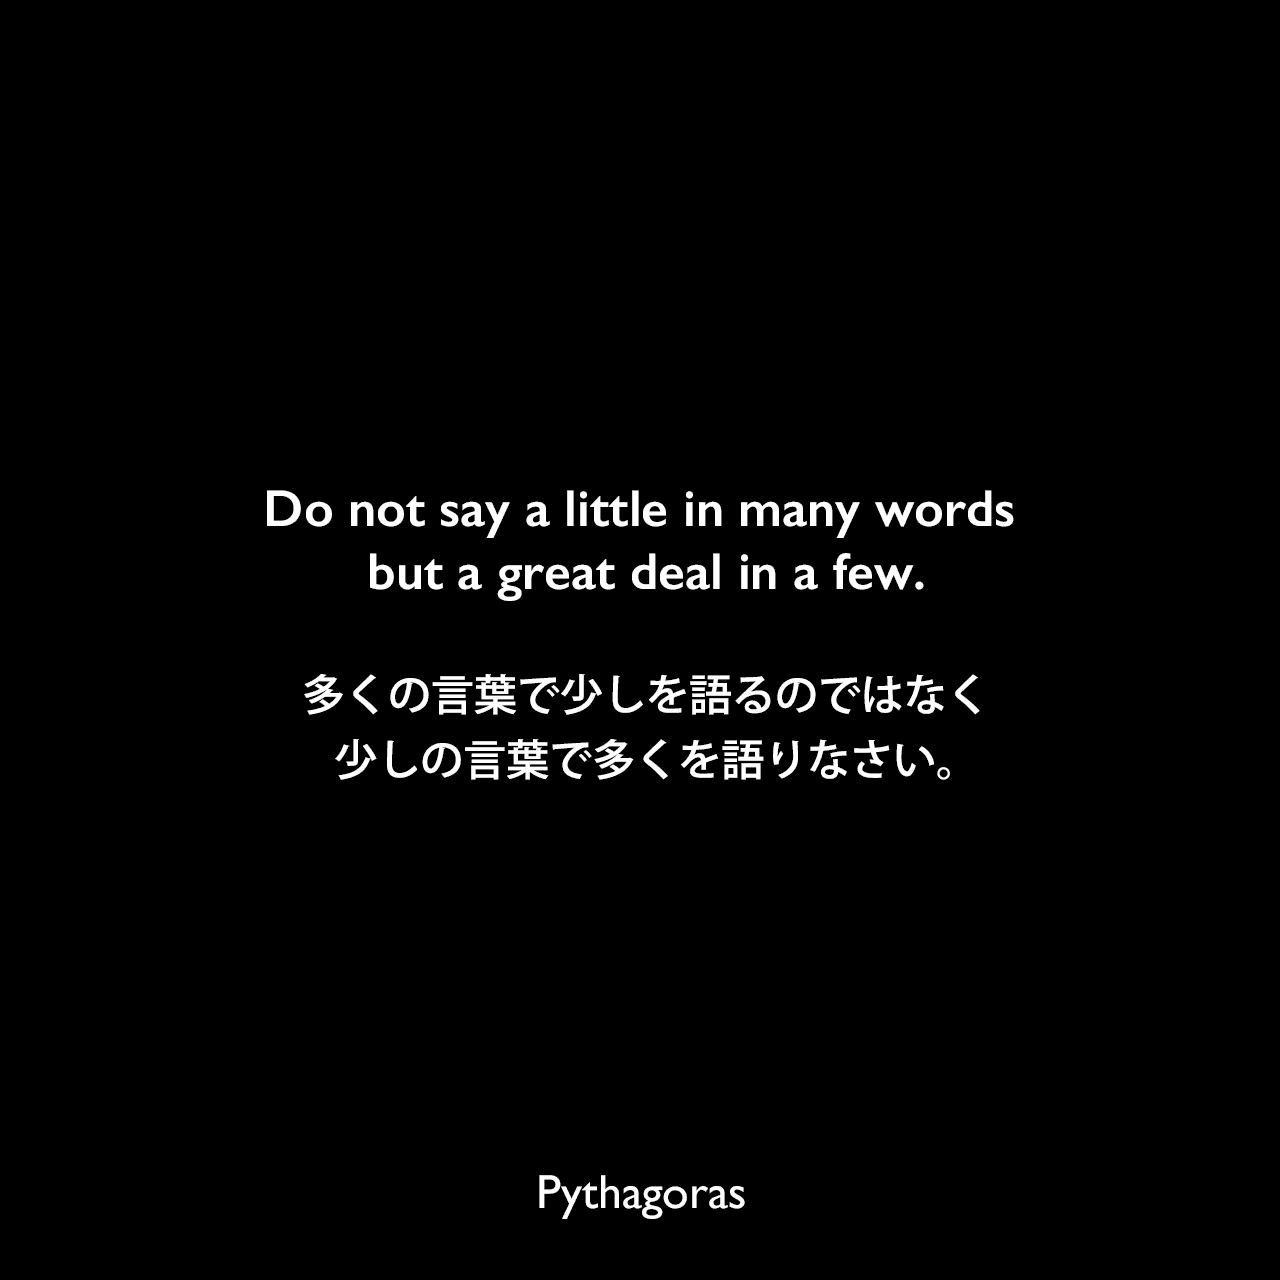 Do not say a little in many words but a great deal in a few.多くの言葉で少しを語るのではなく、少しの言葉で多くを語りなさい。- Tyron Edwardsの本「A Dictionary of Thoughts」よりPythagoras